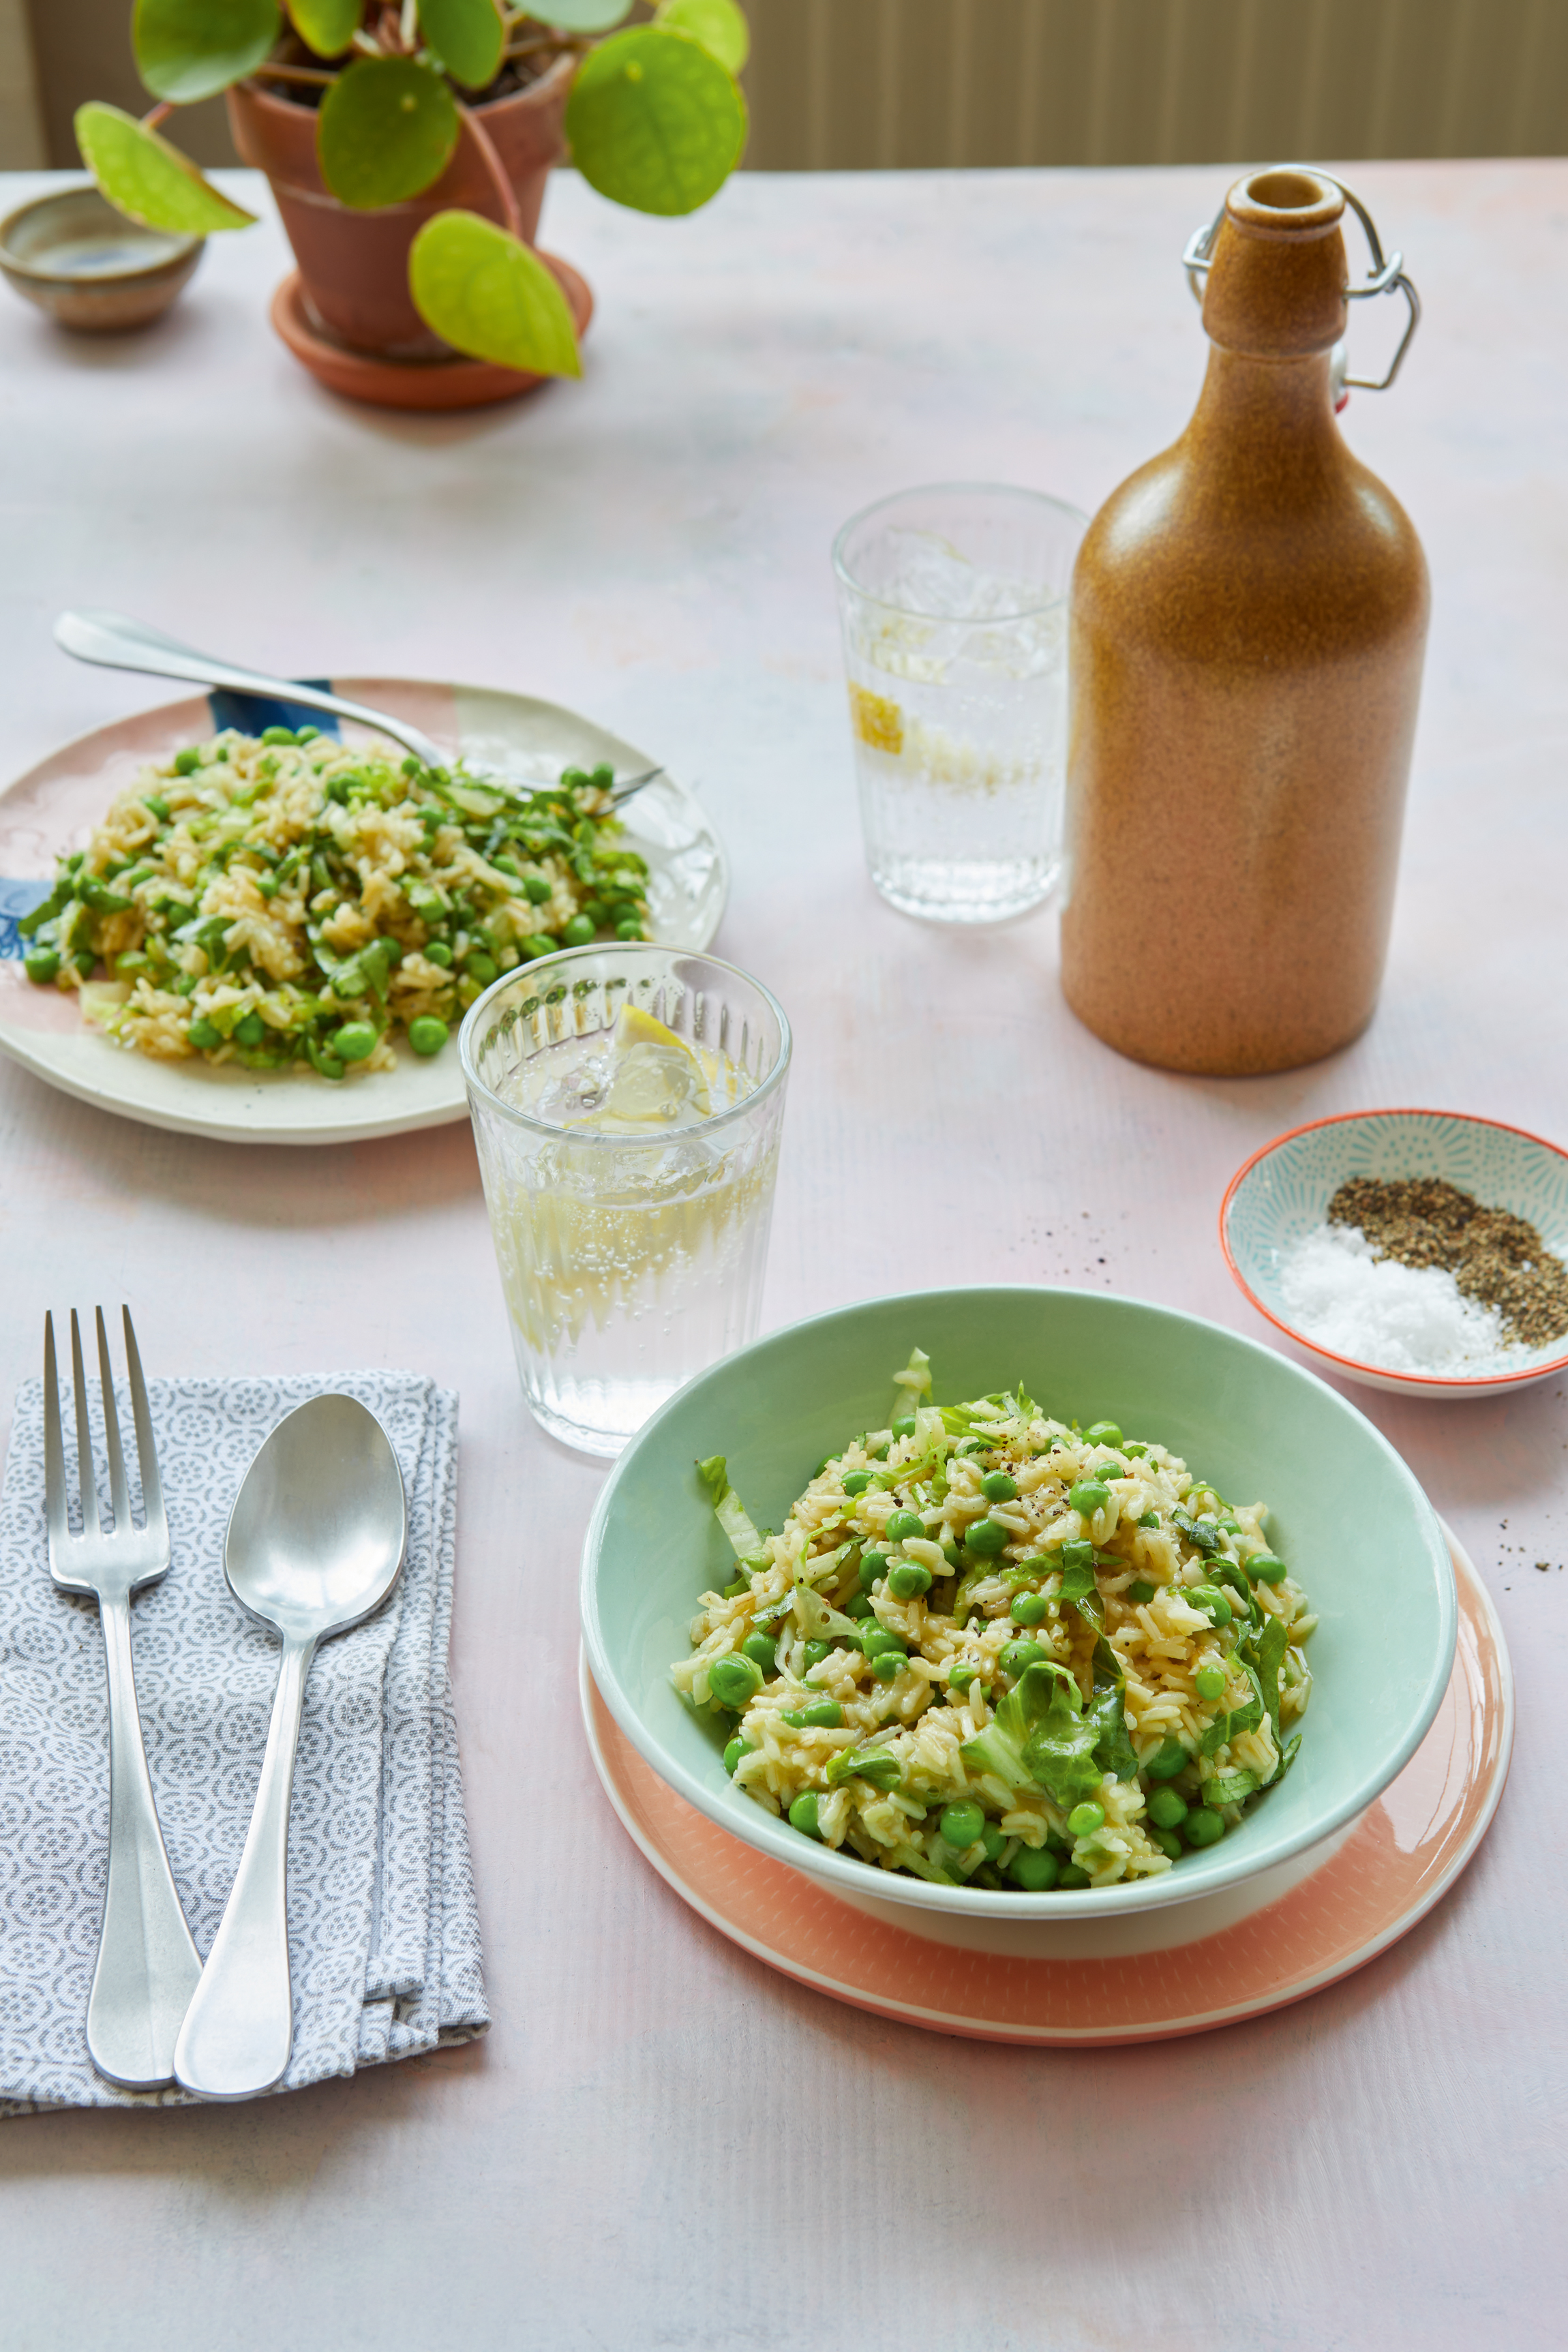 Risotto with peas and lettuce from Thrifty Kitchen